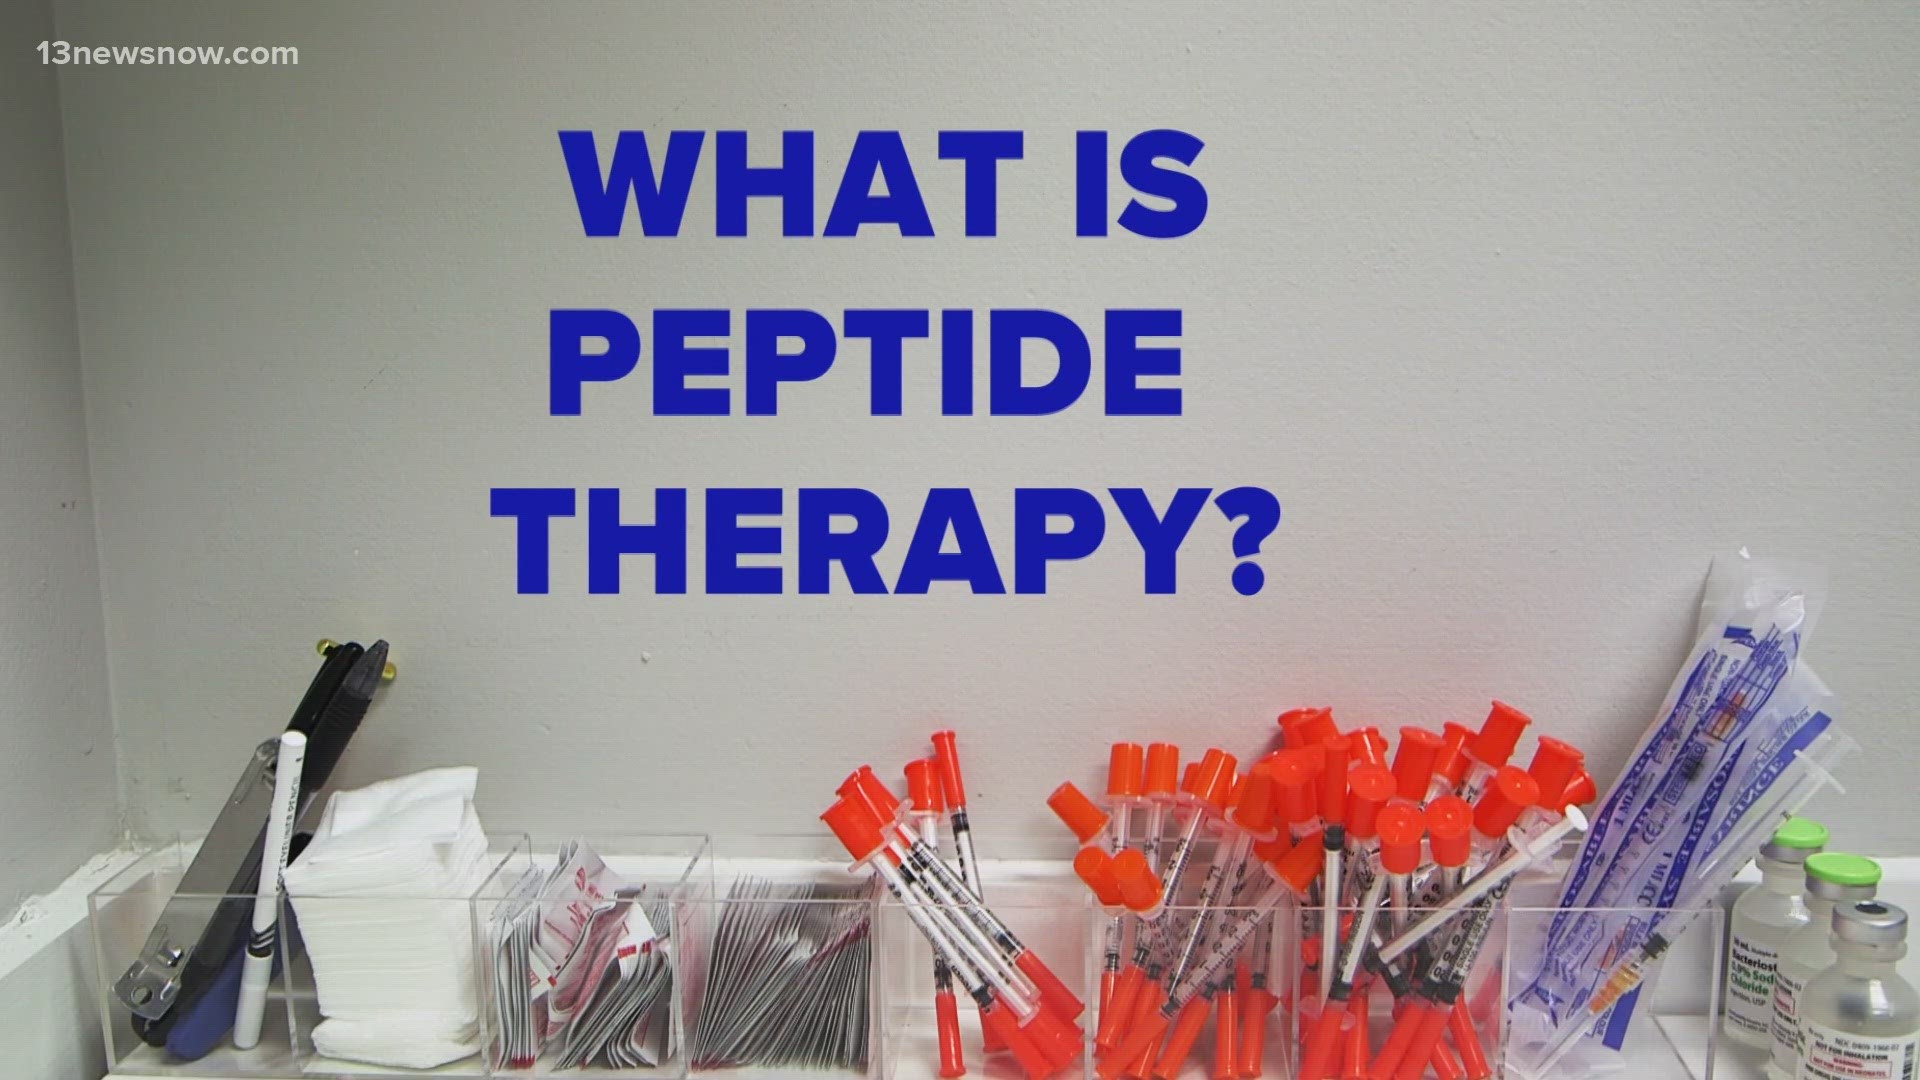 We explore the topic of "peptide therapy," what we still don't know about it, and why some patients are calling it a success.